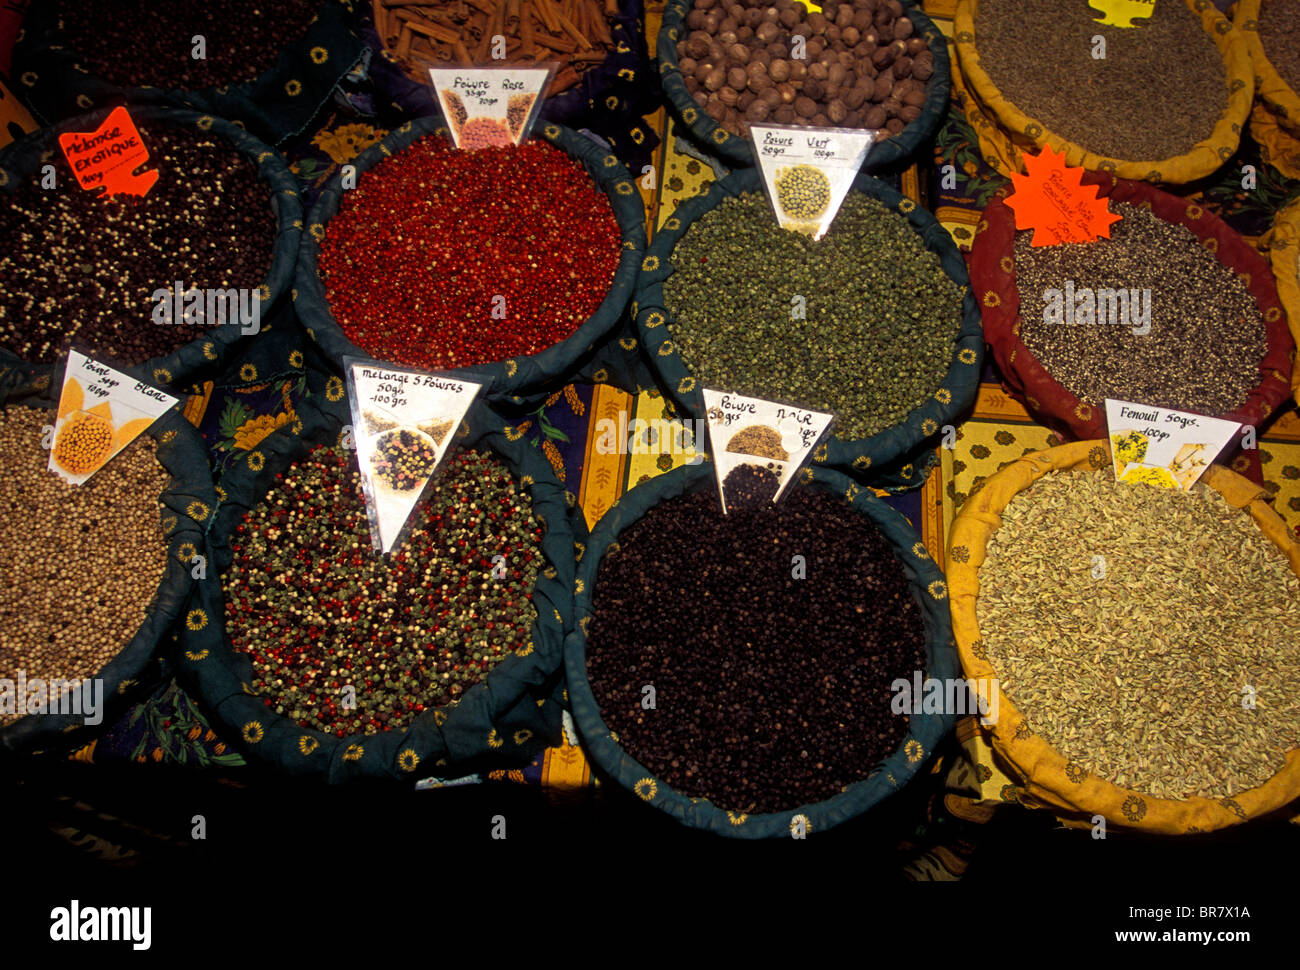 spice vendor, selling spices, spices, spices for sale, Wednesday Market, market day, marketplace, Saint-Remy-de-Provence, Provence, France Stock Photo